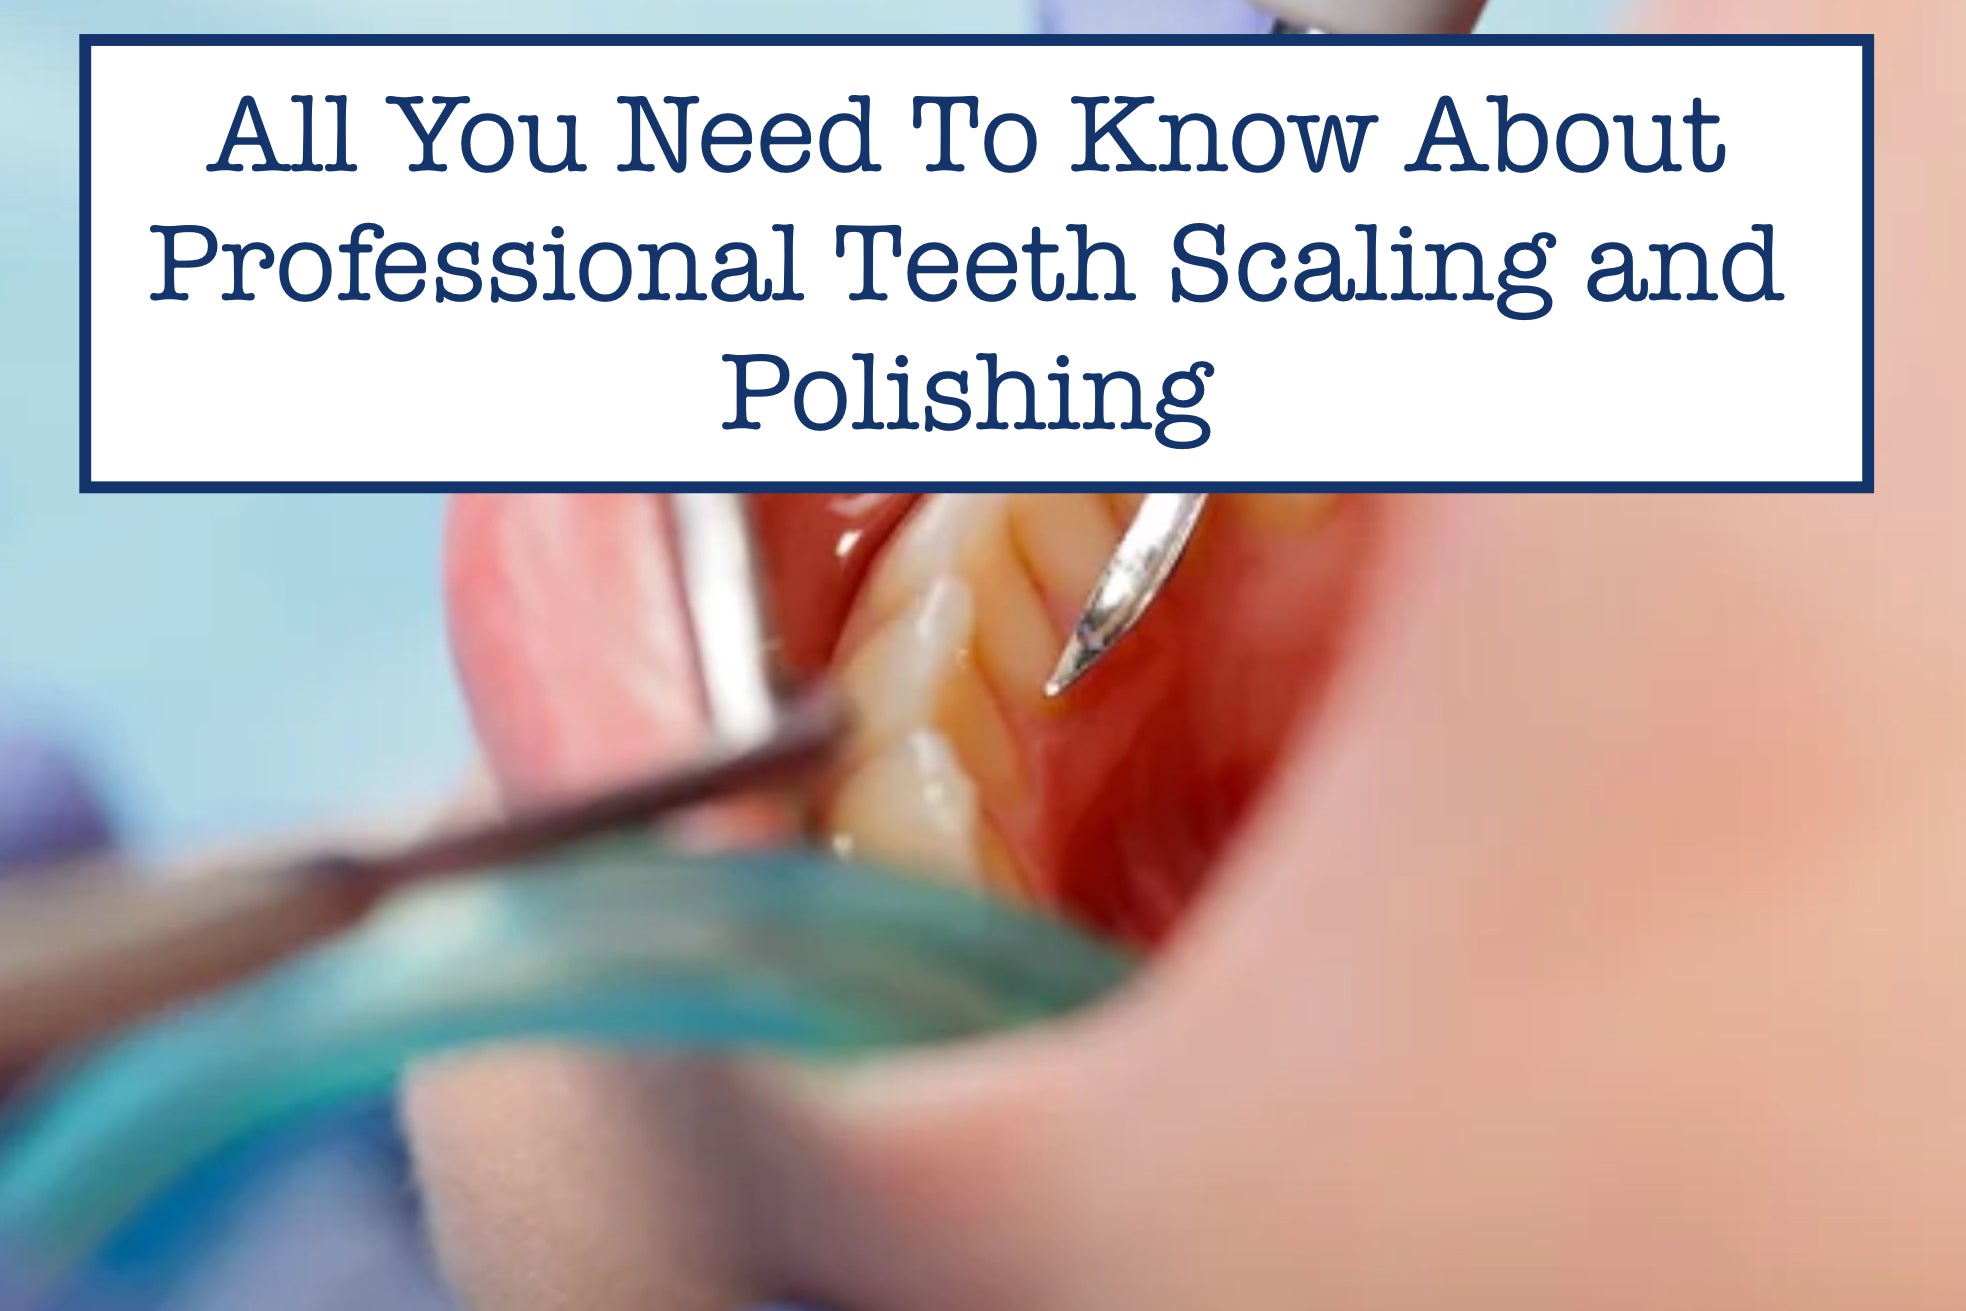 All You Need To Know About Professional Teeth Scaling and Polishing